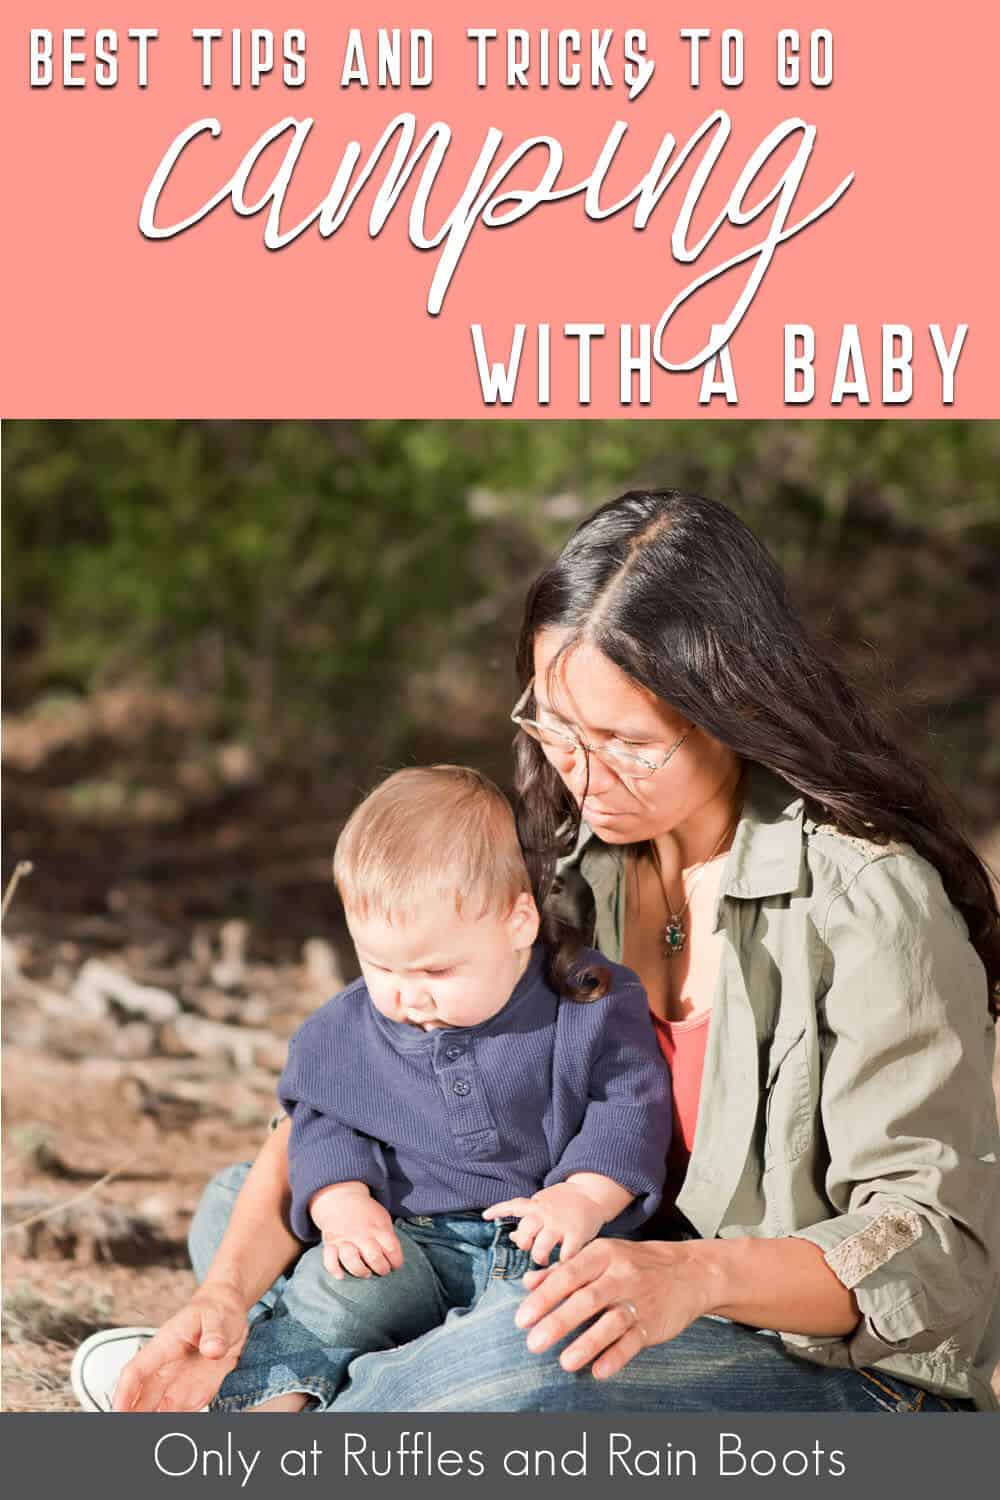 hacks to take a baby camping with text which reads best tips and tricks to go camping with a bab